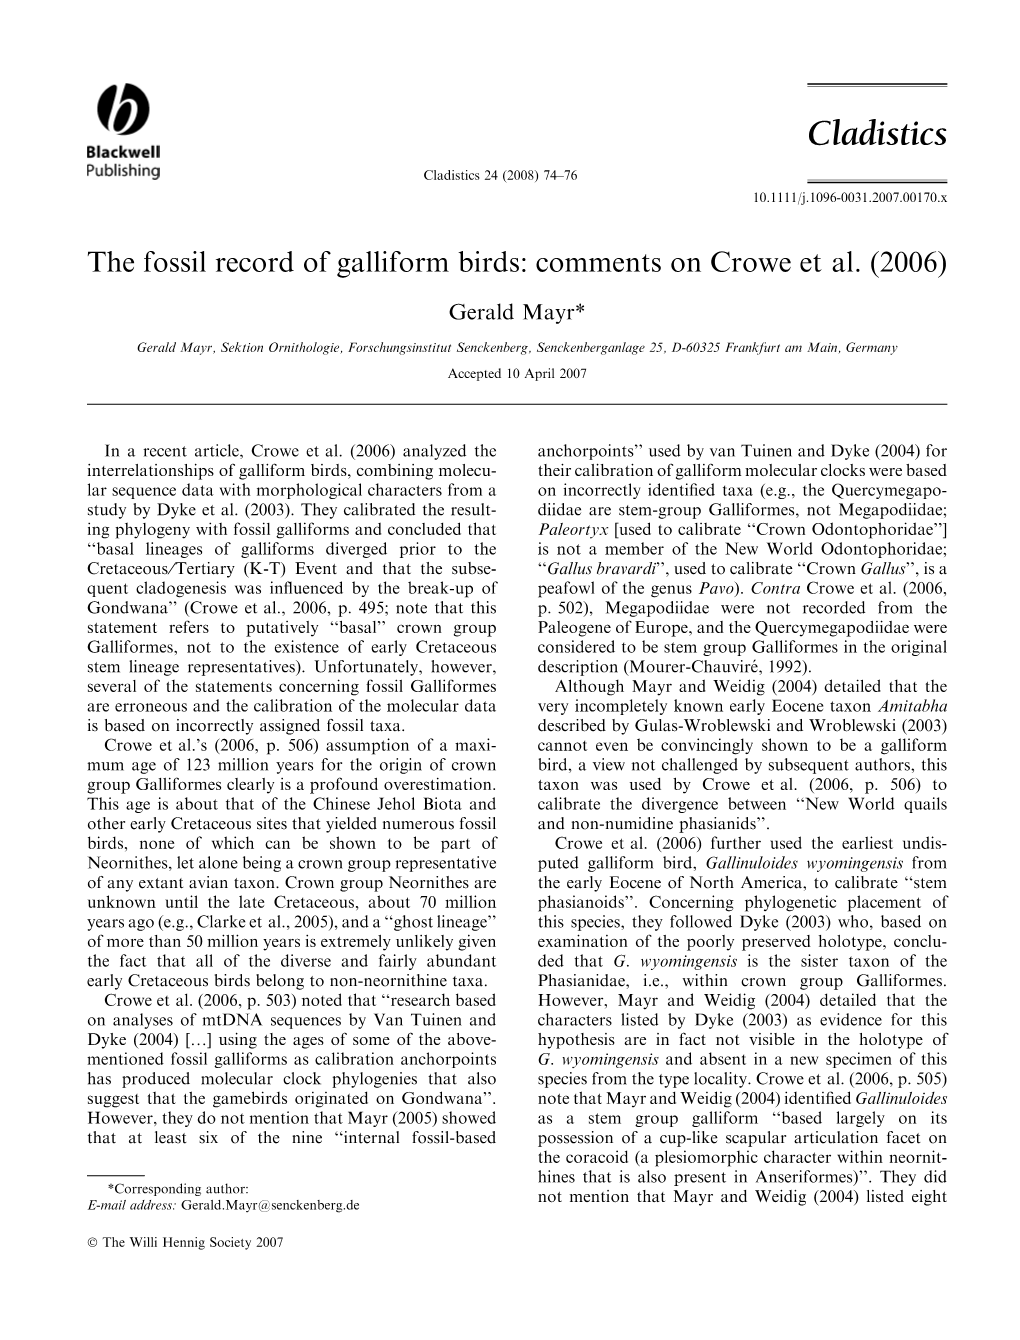 The Fossil Record of Galliform Birds: Comments on Crowe Et Al. (2006)